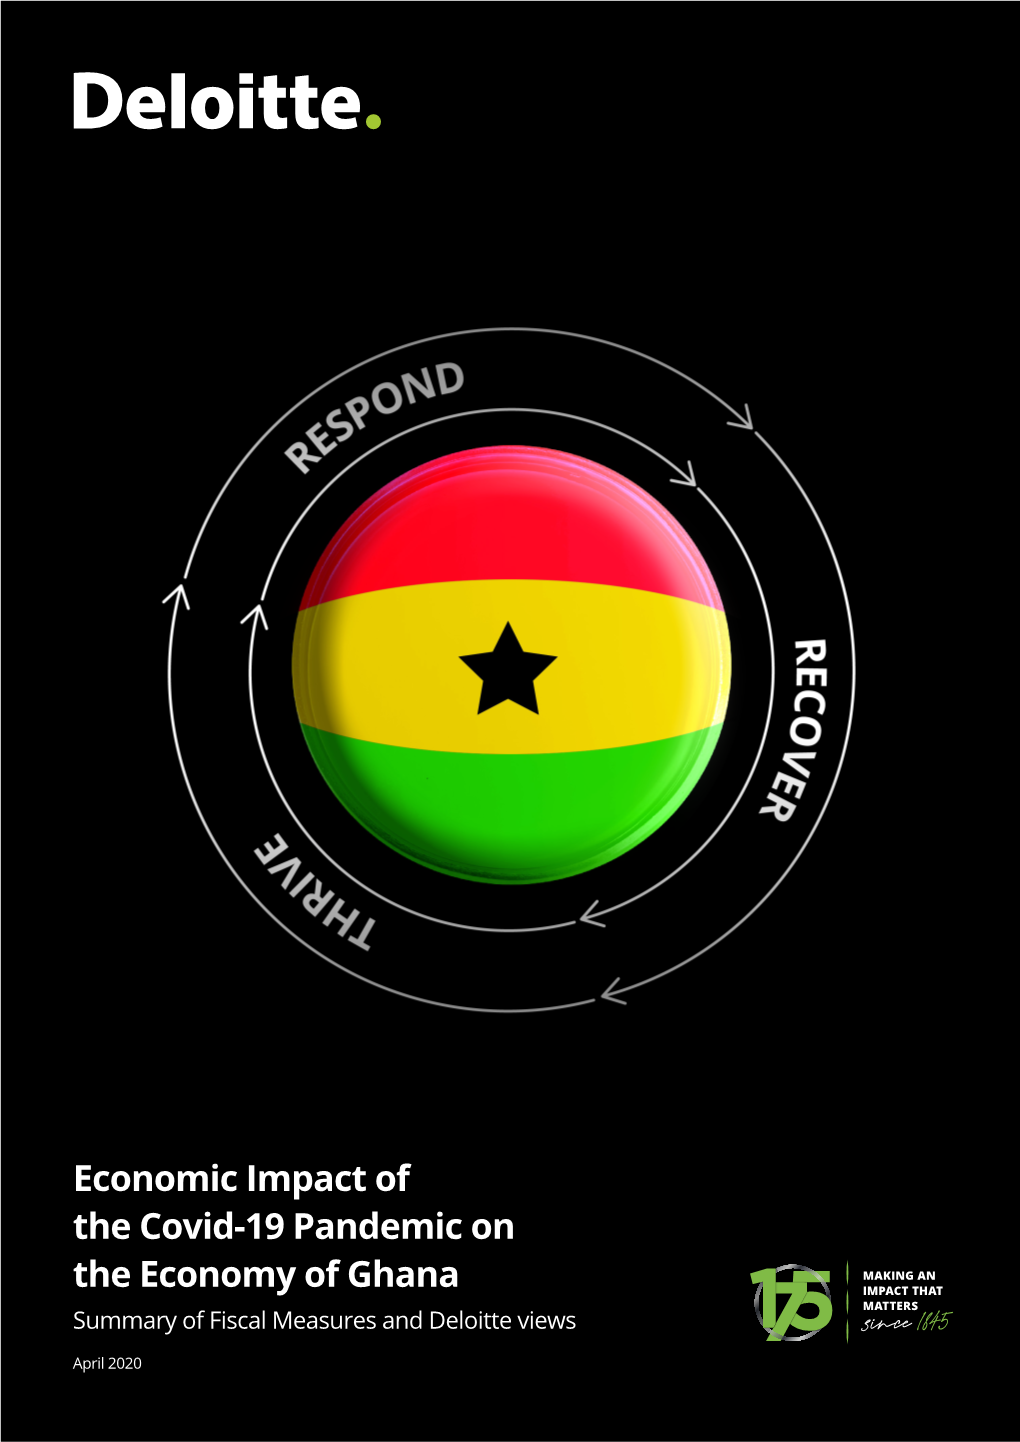 Economic Impact of the Covid-19 Pandemic on the Economy of Ghana Summary of Fiscal Measures and Deloitte Views